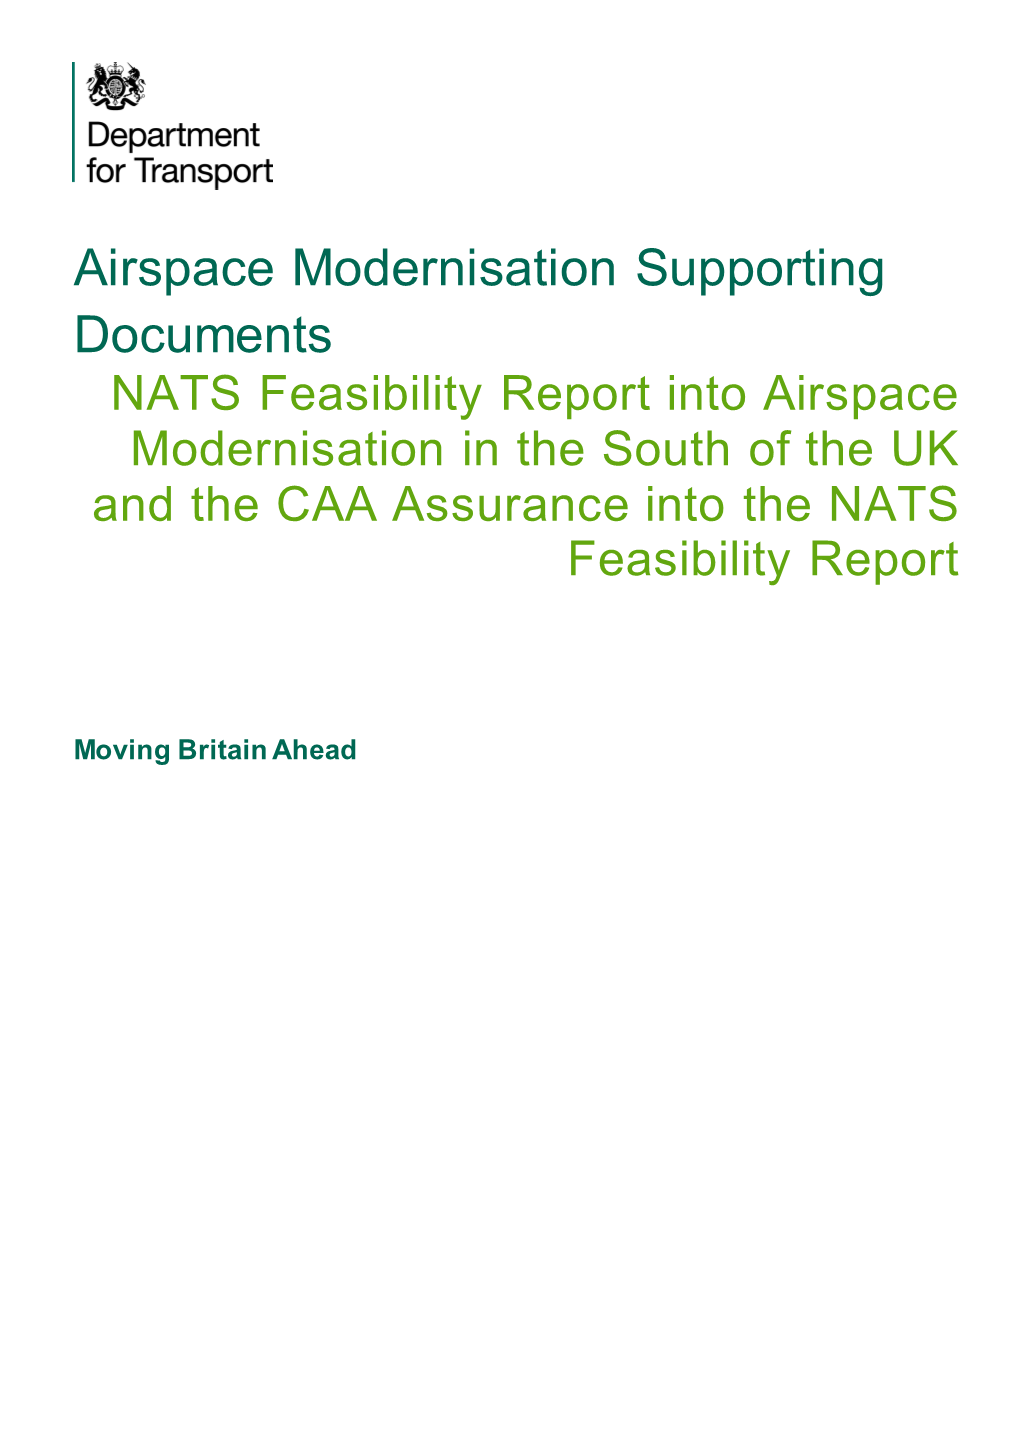 NATS Feasibility Report Into Airspace Modernisation in the South of the UK and the CAA Assurance Into the NATS Feasibility Report